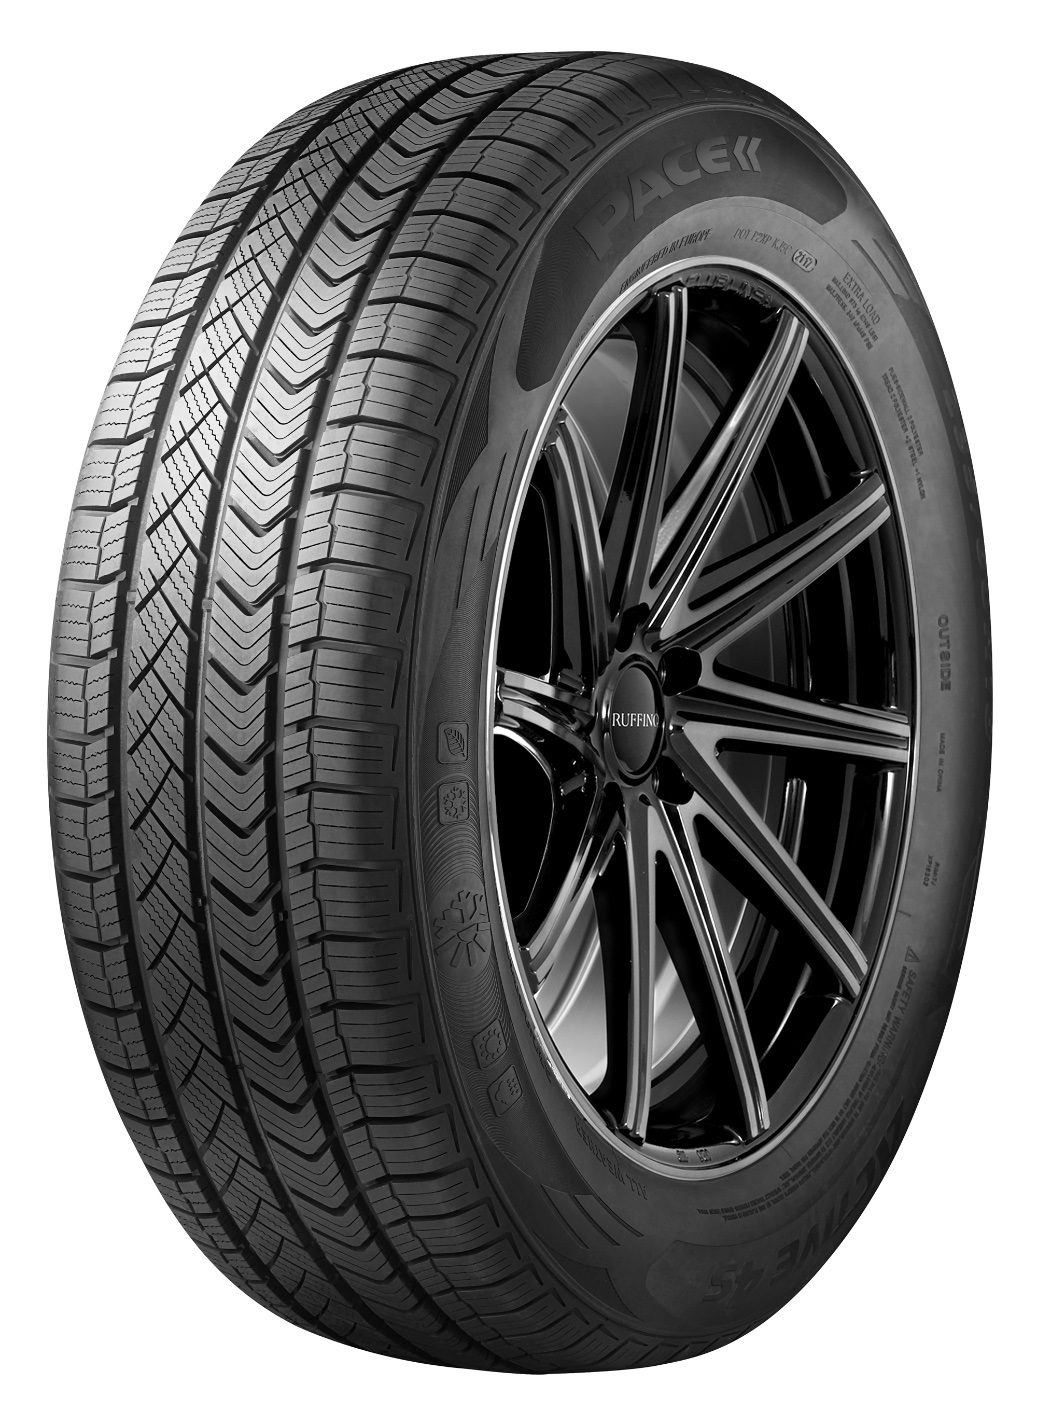 Gomme Nuove Pace 195/50 R15 82V ACTIVE 4S M+S pneumatici nuovi All Season